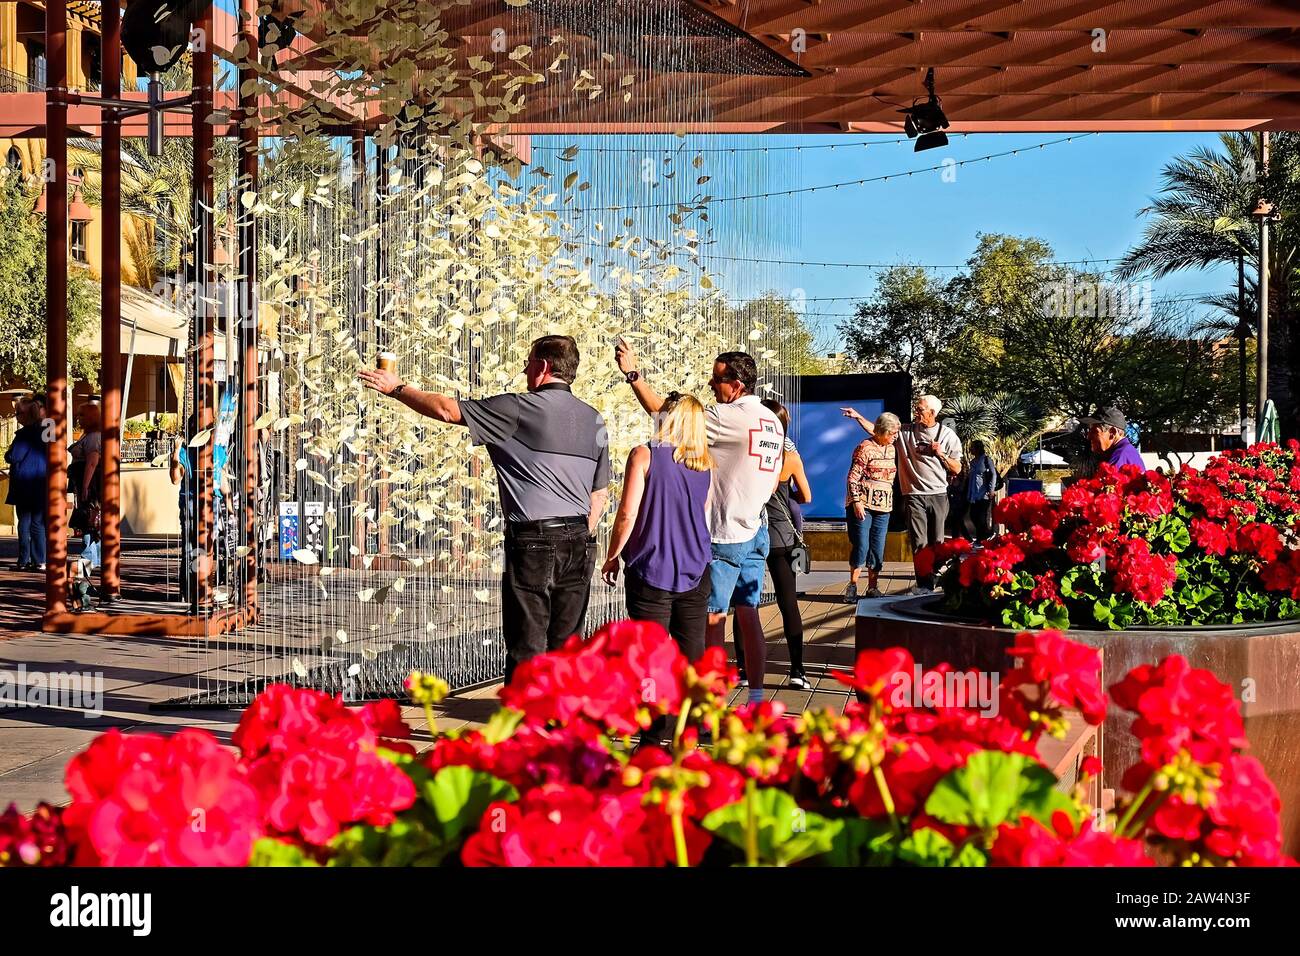 Downtown Scottsdale, Arizona. People sightseeing at the Canal Convergence.public art event. Stock Photo